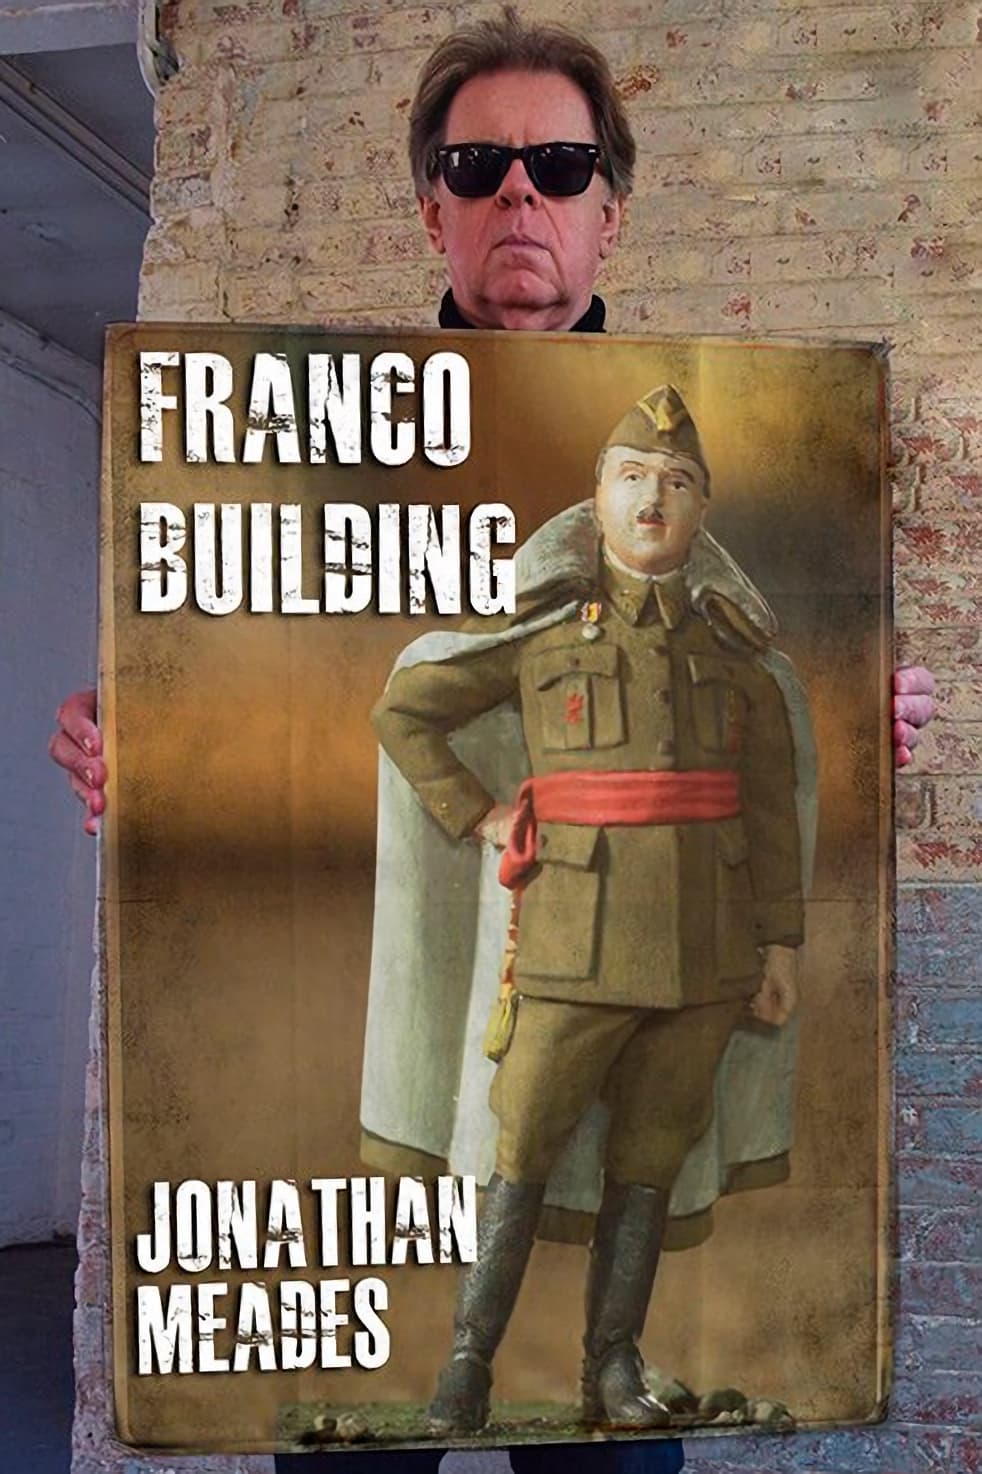 Franco Building with Jonathan Meades